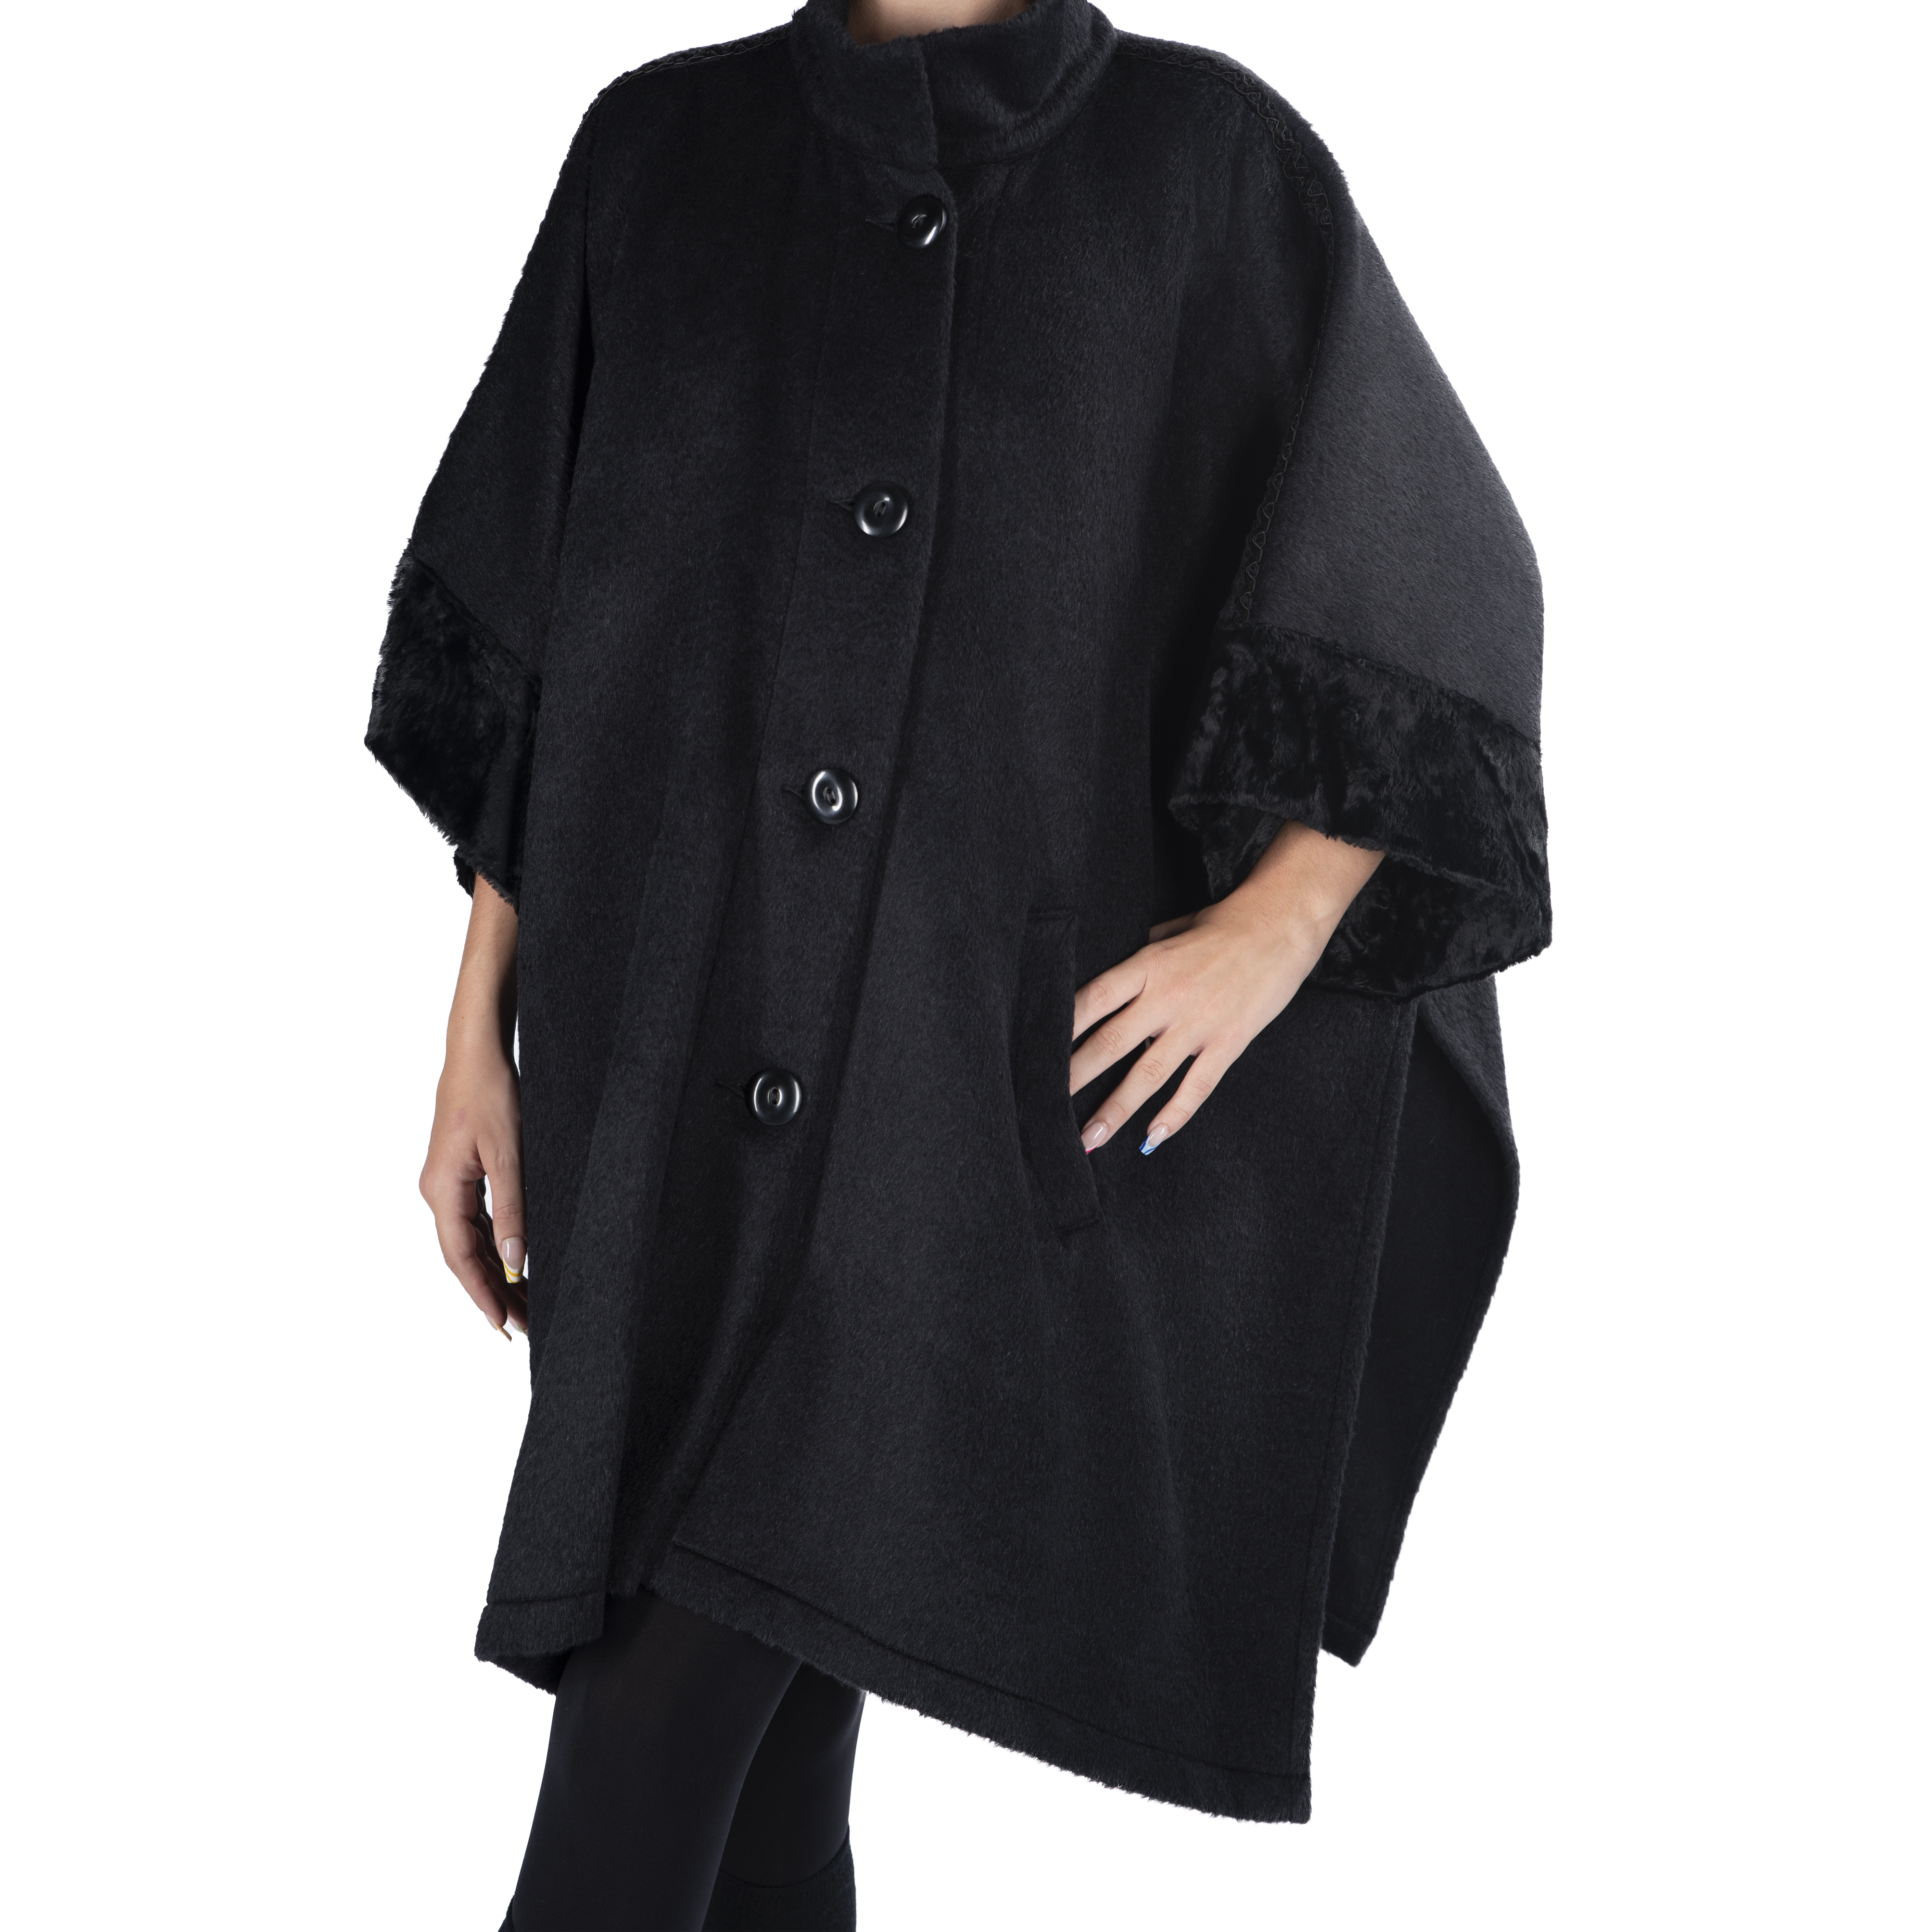 Poncho buttoned front in black wool and eco fur 